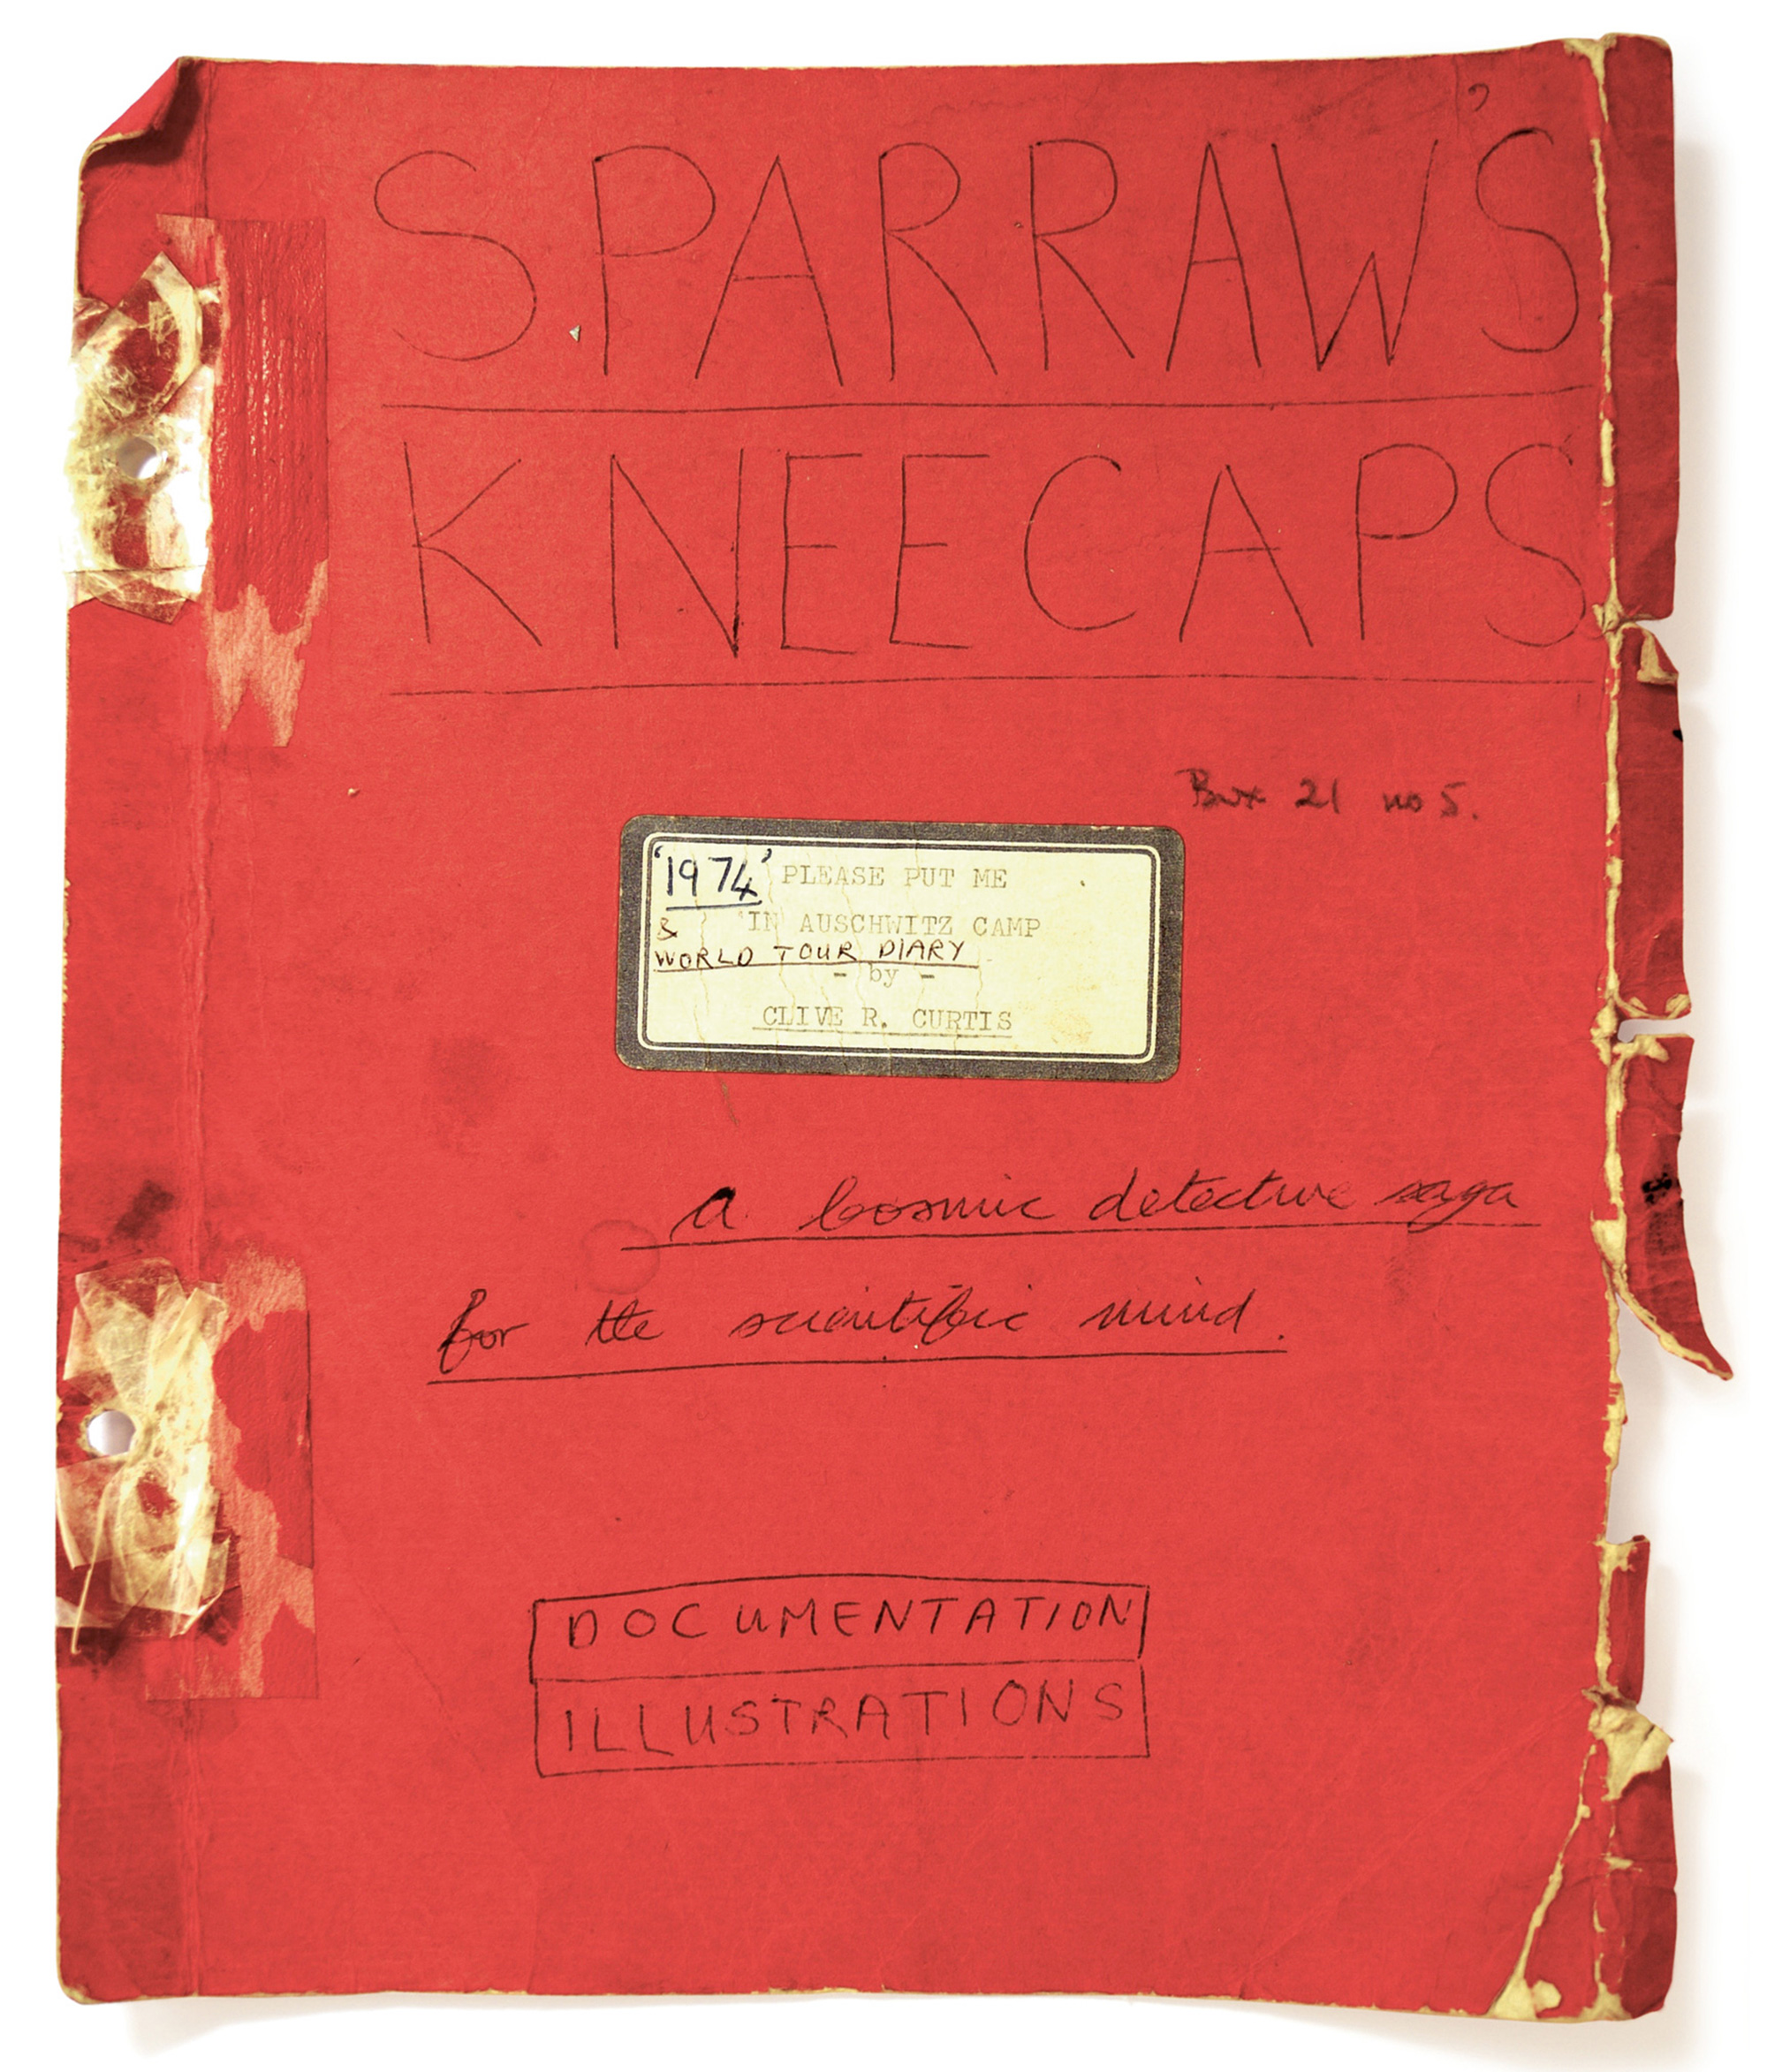 Front cover of “Sparraw’s Kneecaps” manuscript by Clive R. Curtis, ca. 1974. All photos Taki Shiomitsu. All images courtesy Elizabeth Price and Wysing Arts Centre.